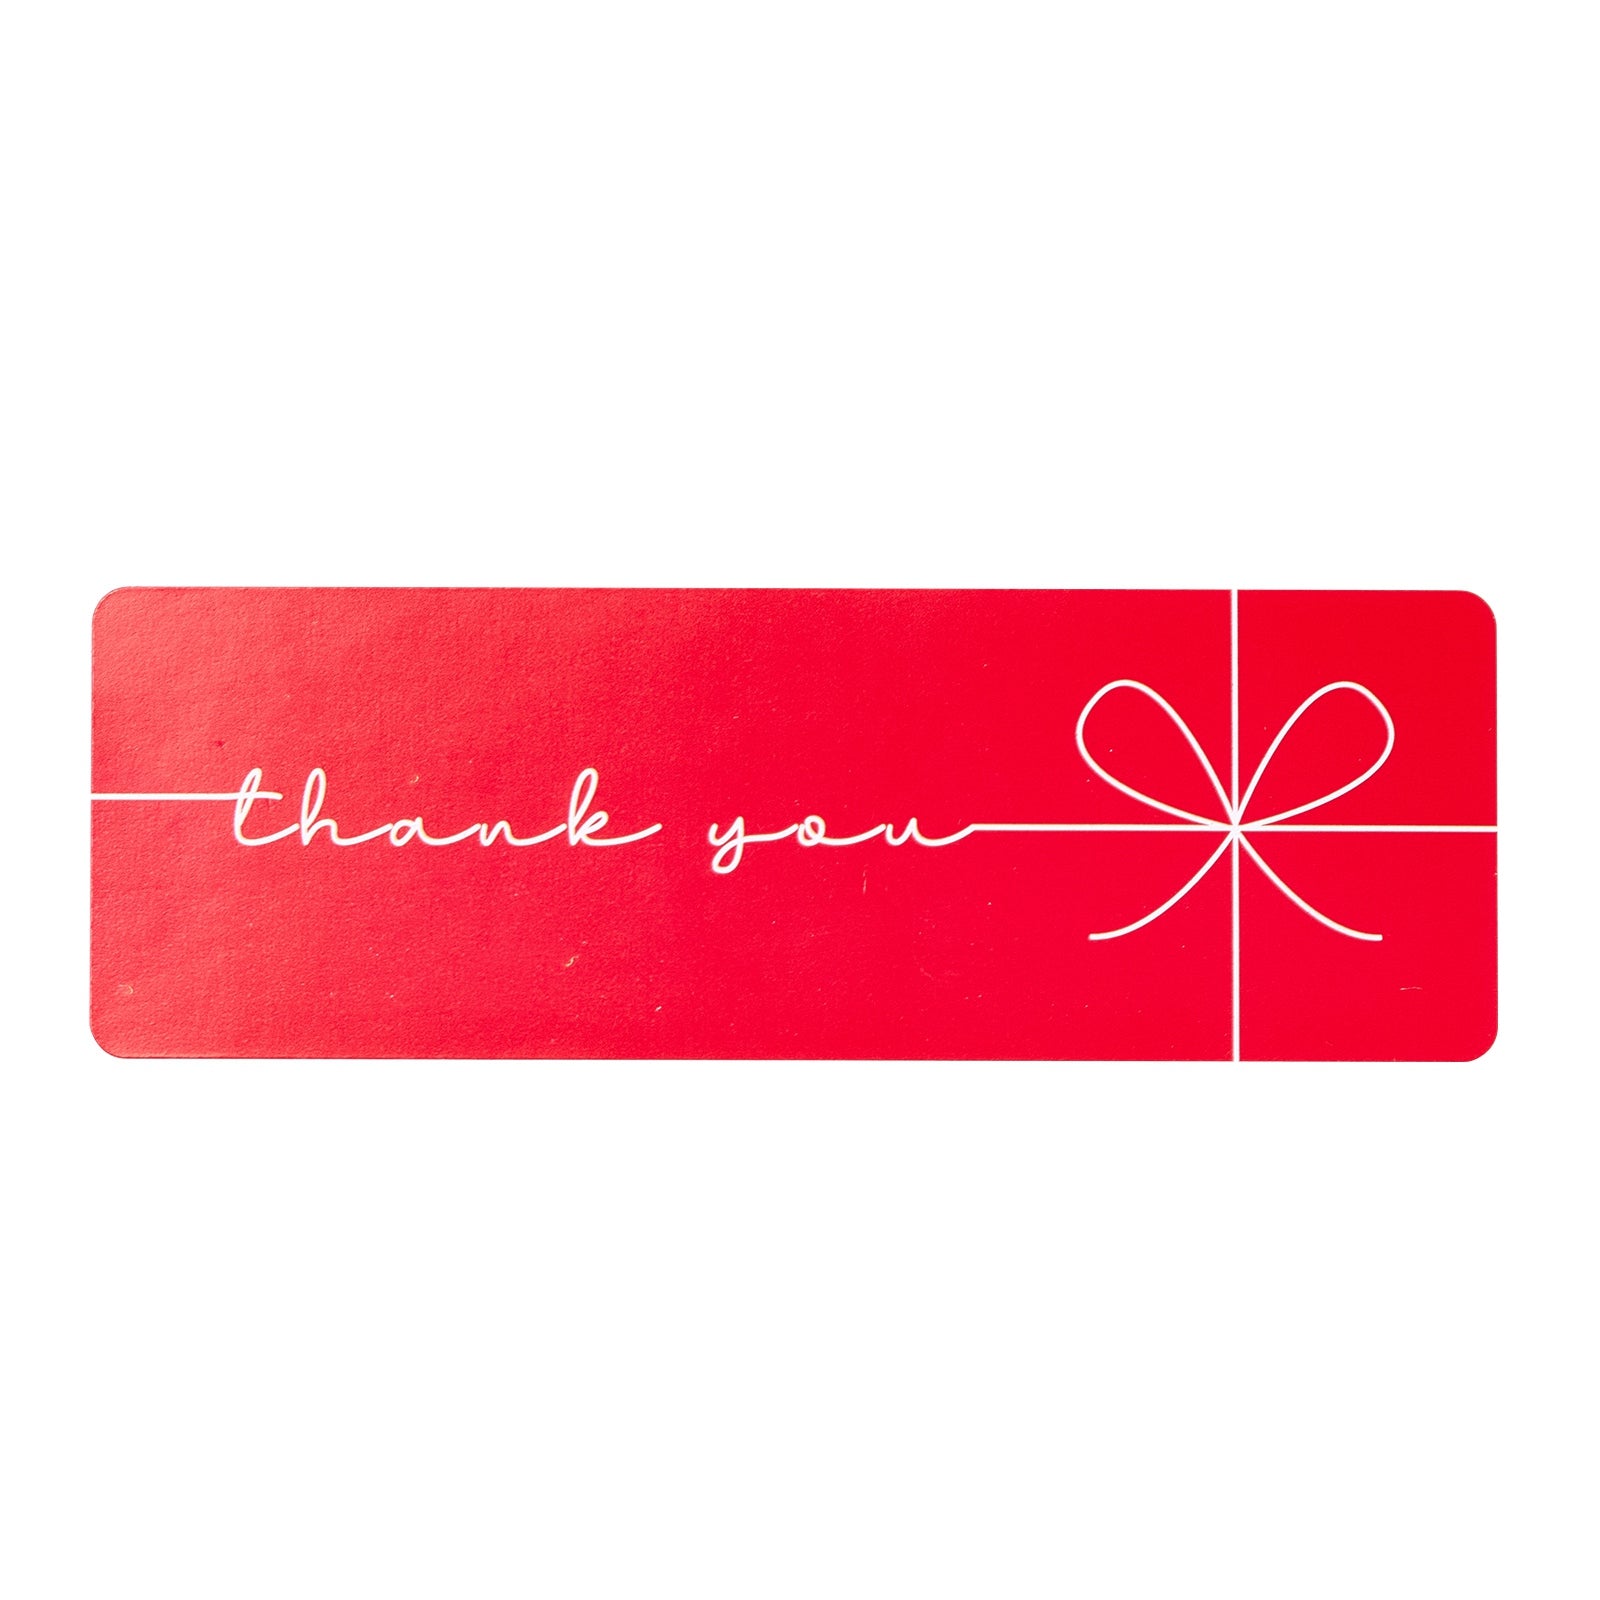 Globleland Thank You Sticker, Self-Adhesive Paper Gift Tag Stickers, Rectangle, Adhesive Labels, for Present & Packing Bags, Word, 7.4x2.5cm, 120pcs/roll